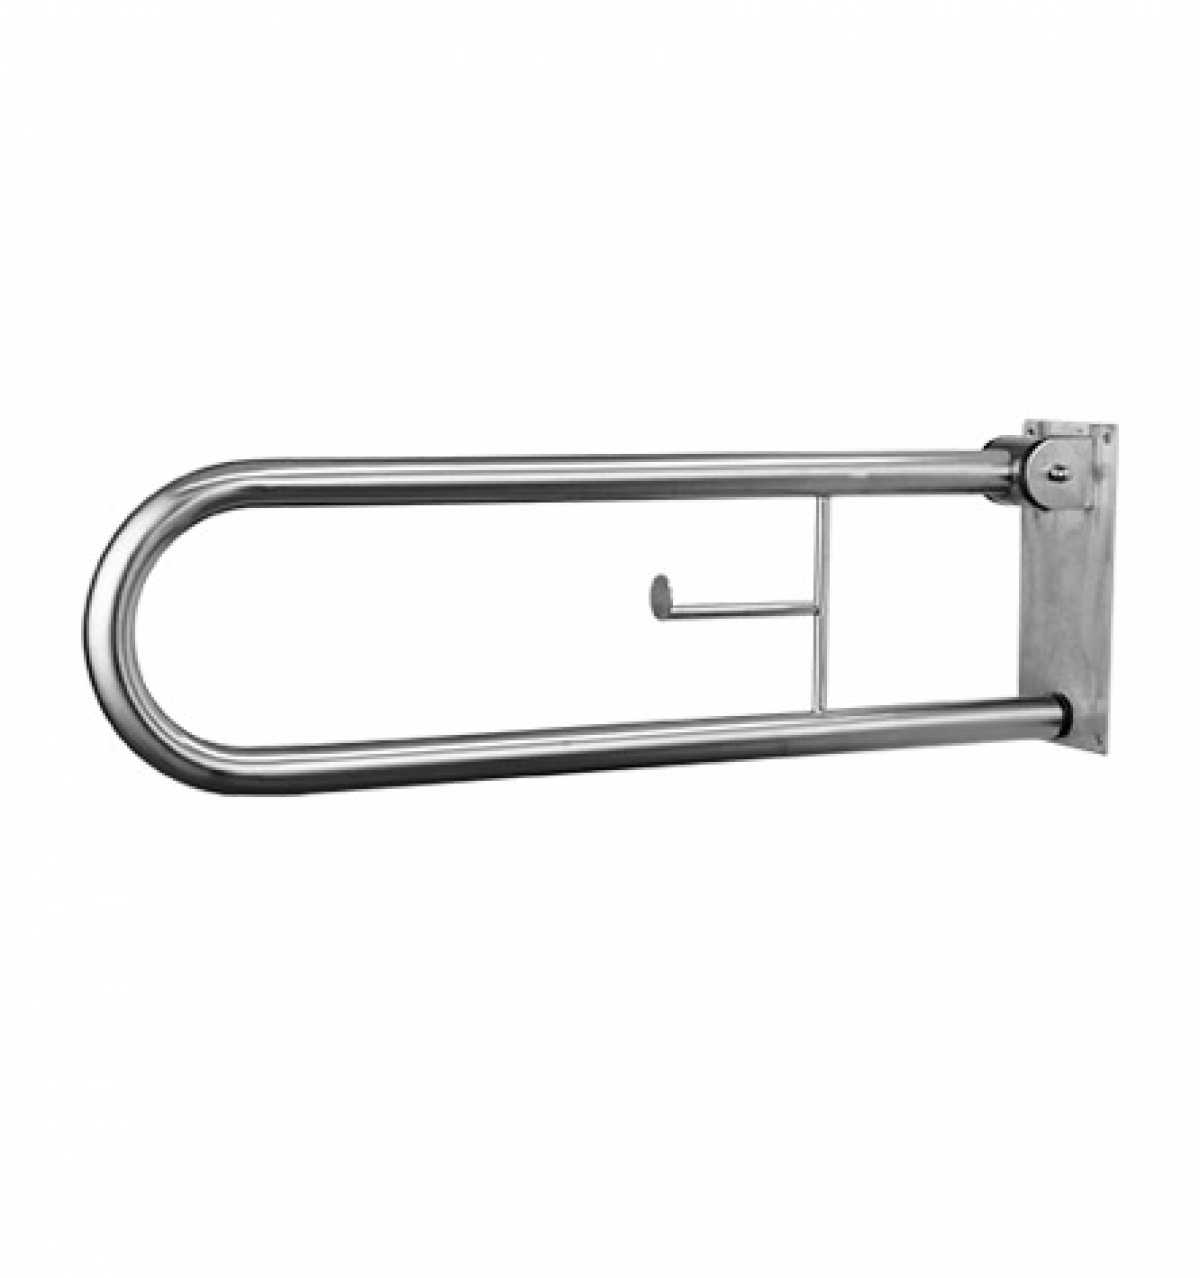 Fold-up Grab Bar with Roll Holder